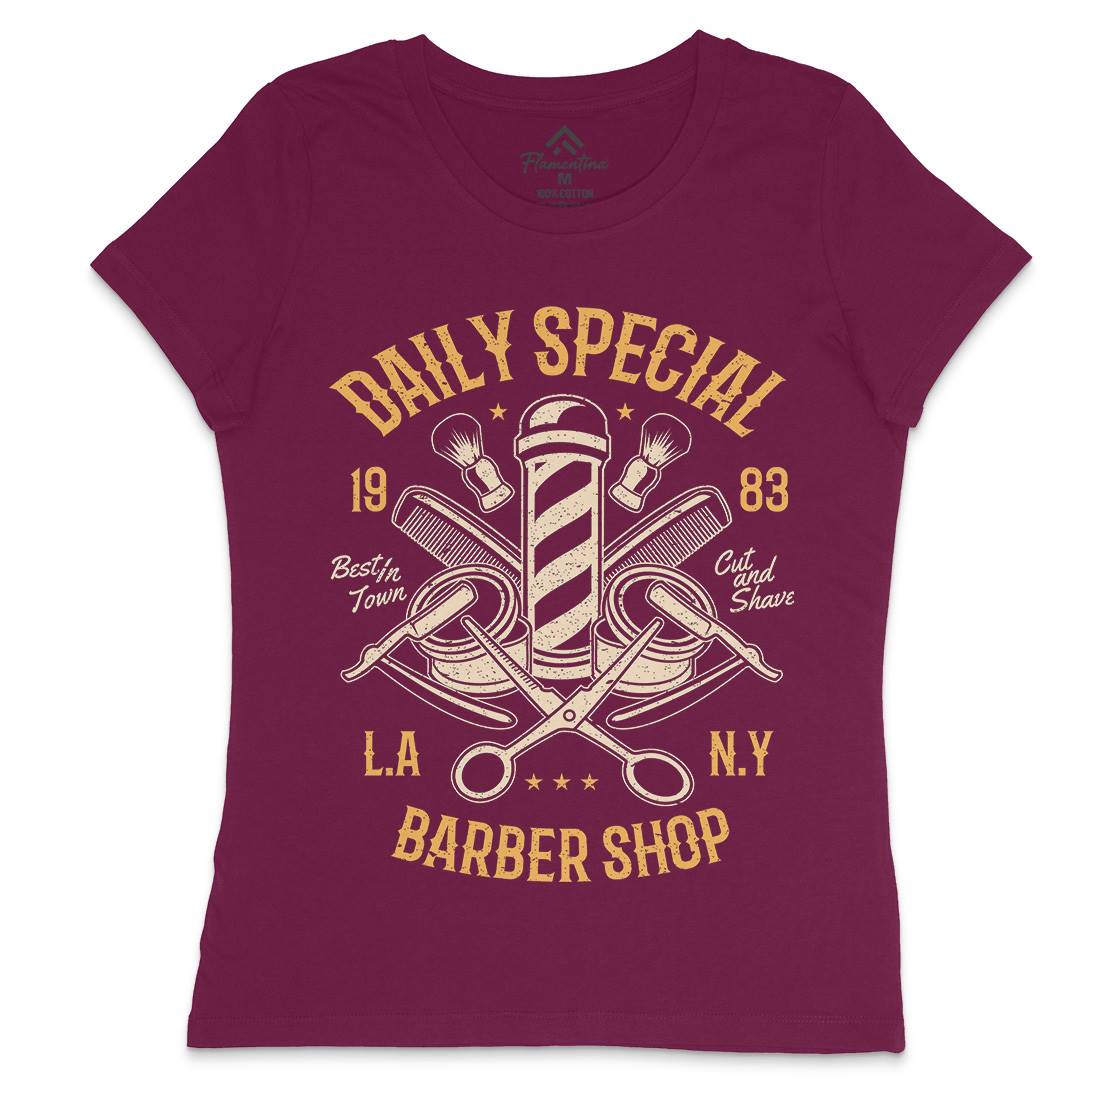 Daily Special Shop Womens Crew Neck T-Shirt Barber A041